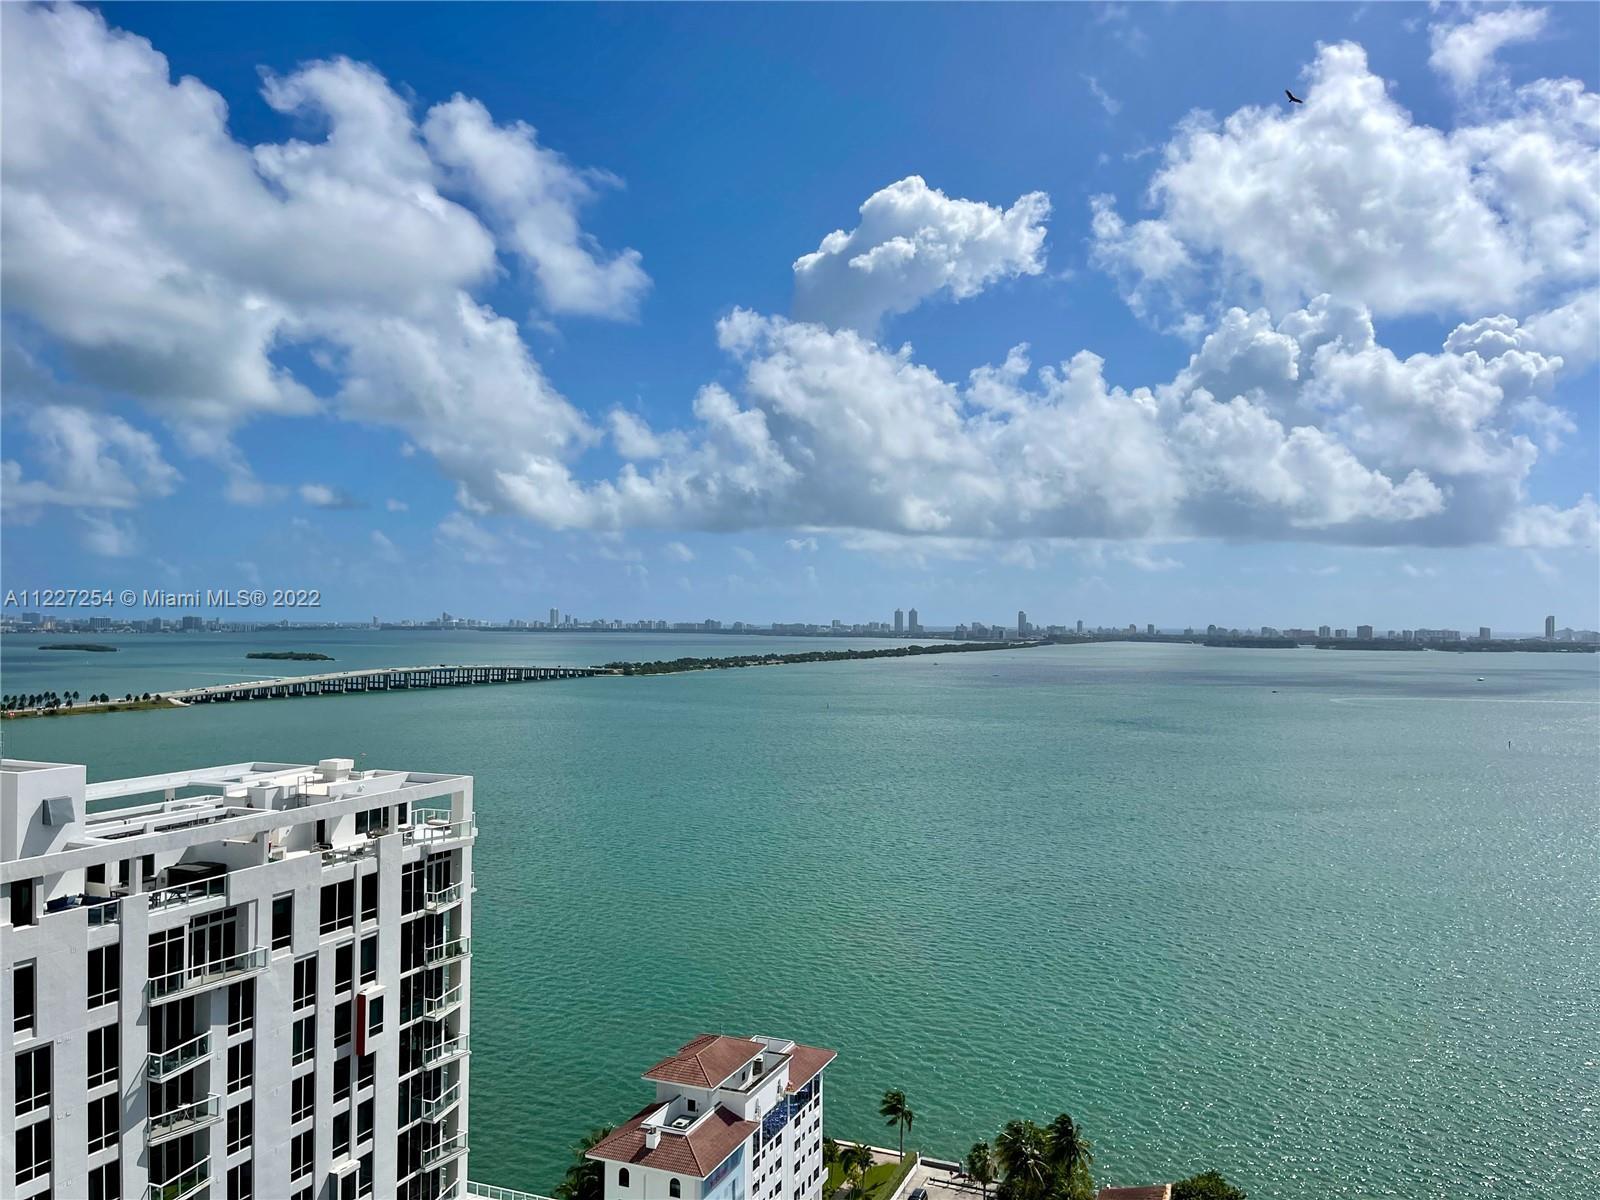 Wonderful 3 bedroom/3 bathroom unit at Bay House with breathtaking views of the Bay! Semi private fo